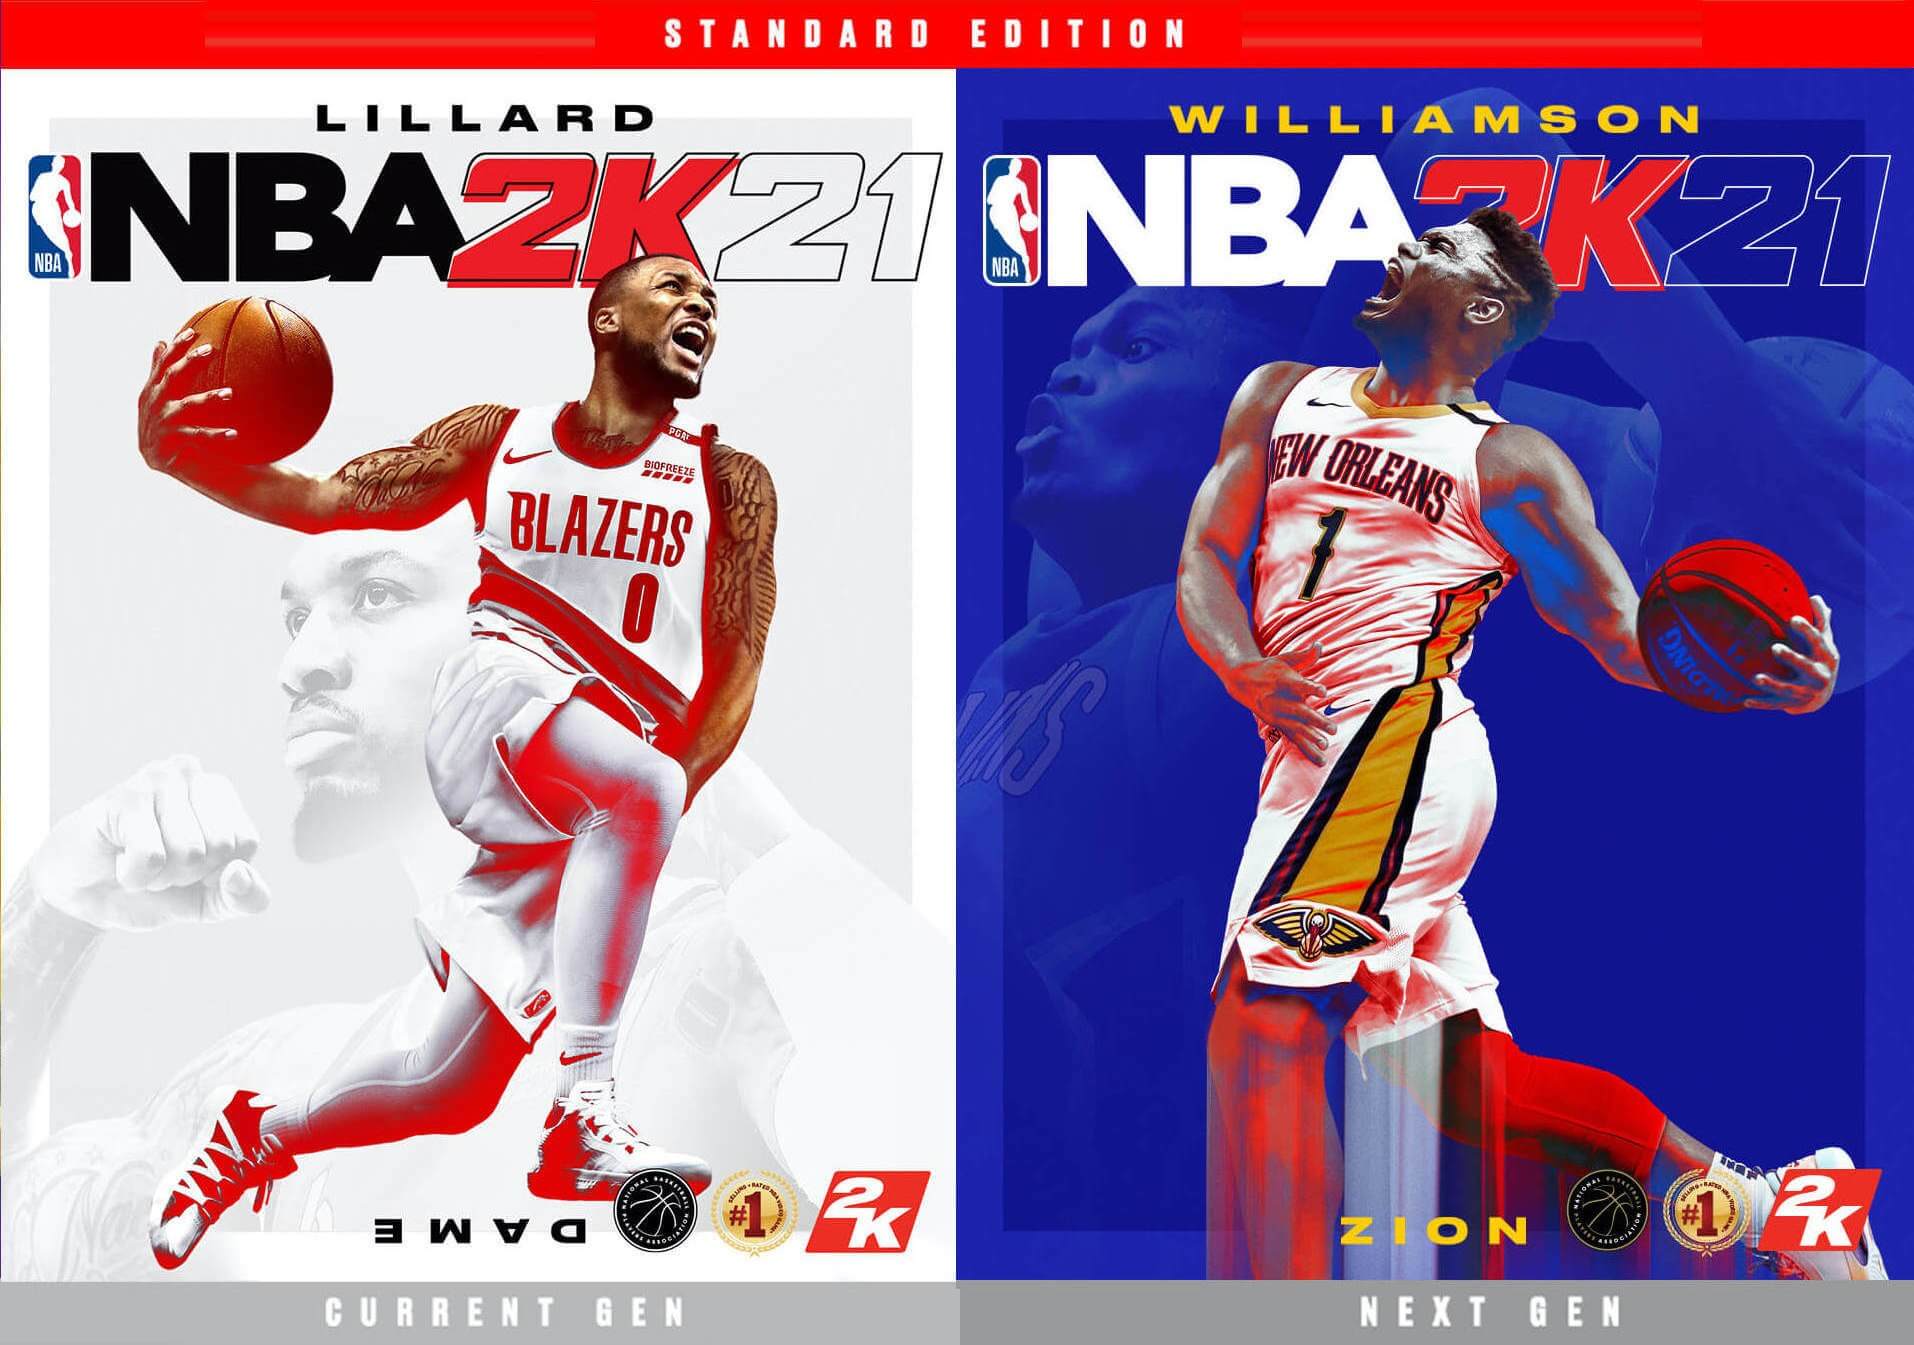 NBA 2K21 Comes With A Price Bump For Next Gen Consoles